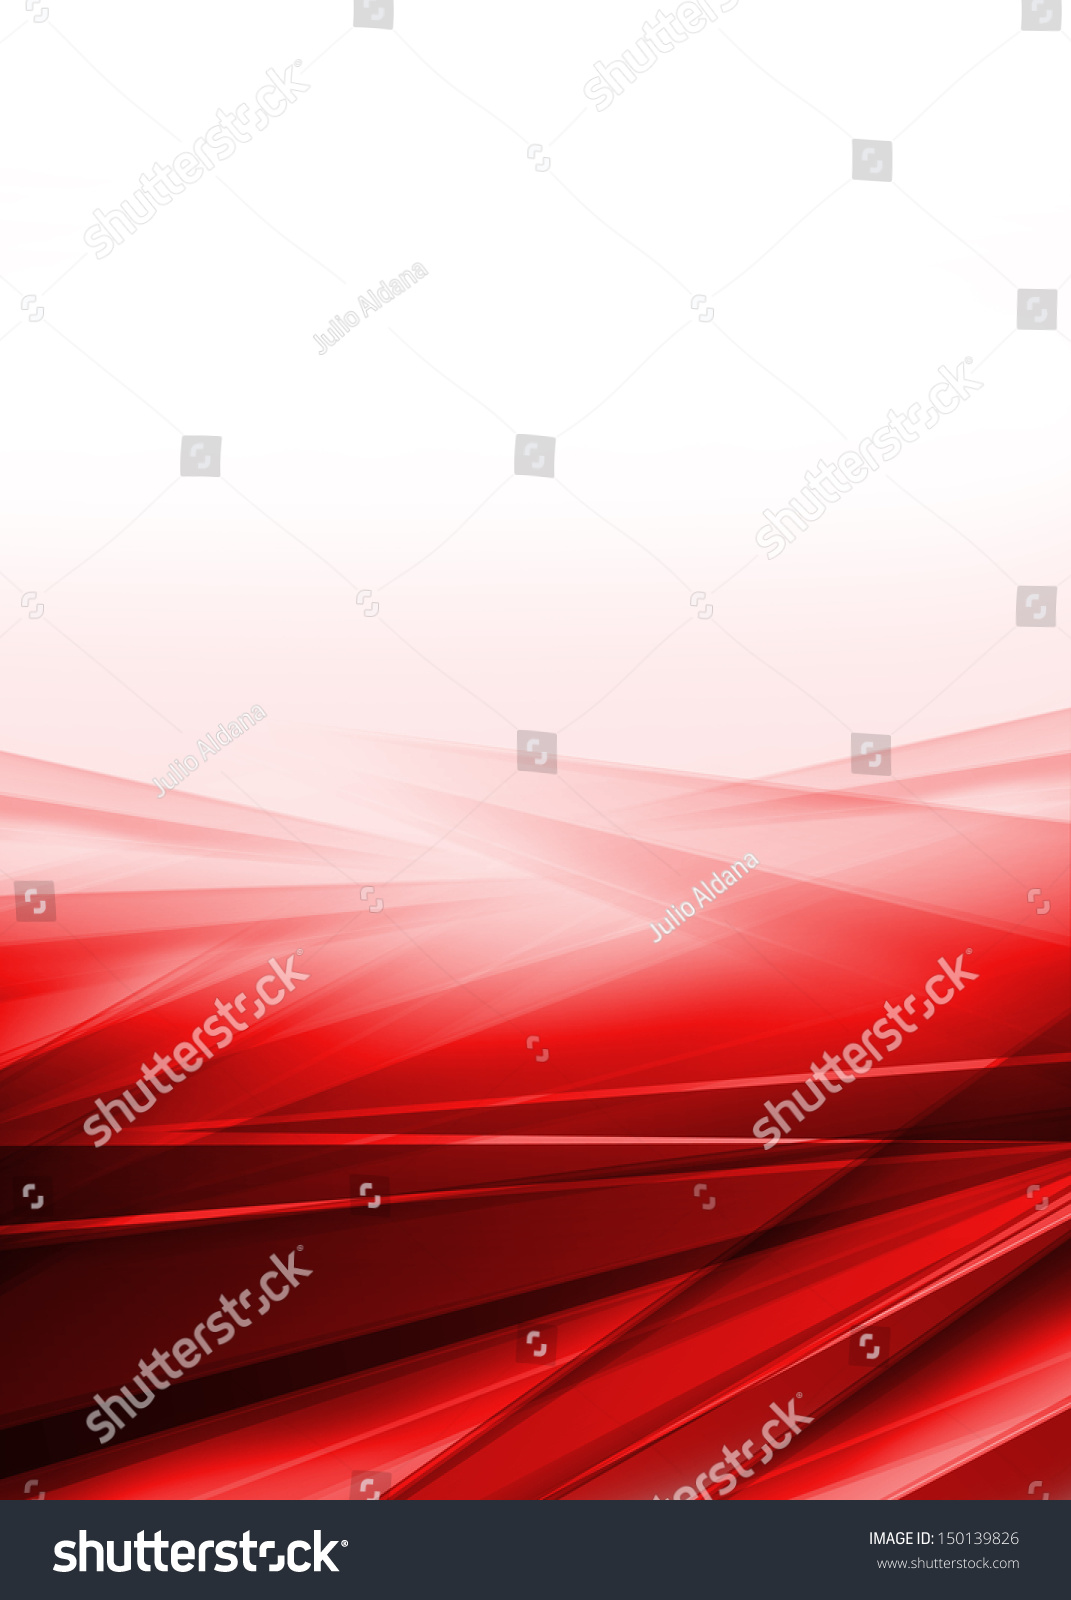 Abstract Red White Background Stock Illustration 150139826 | Shutterstock